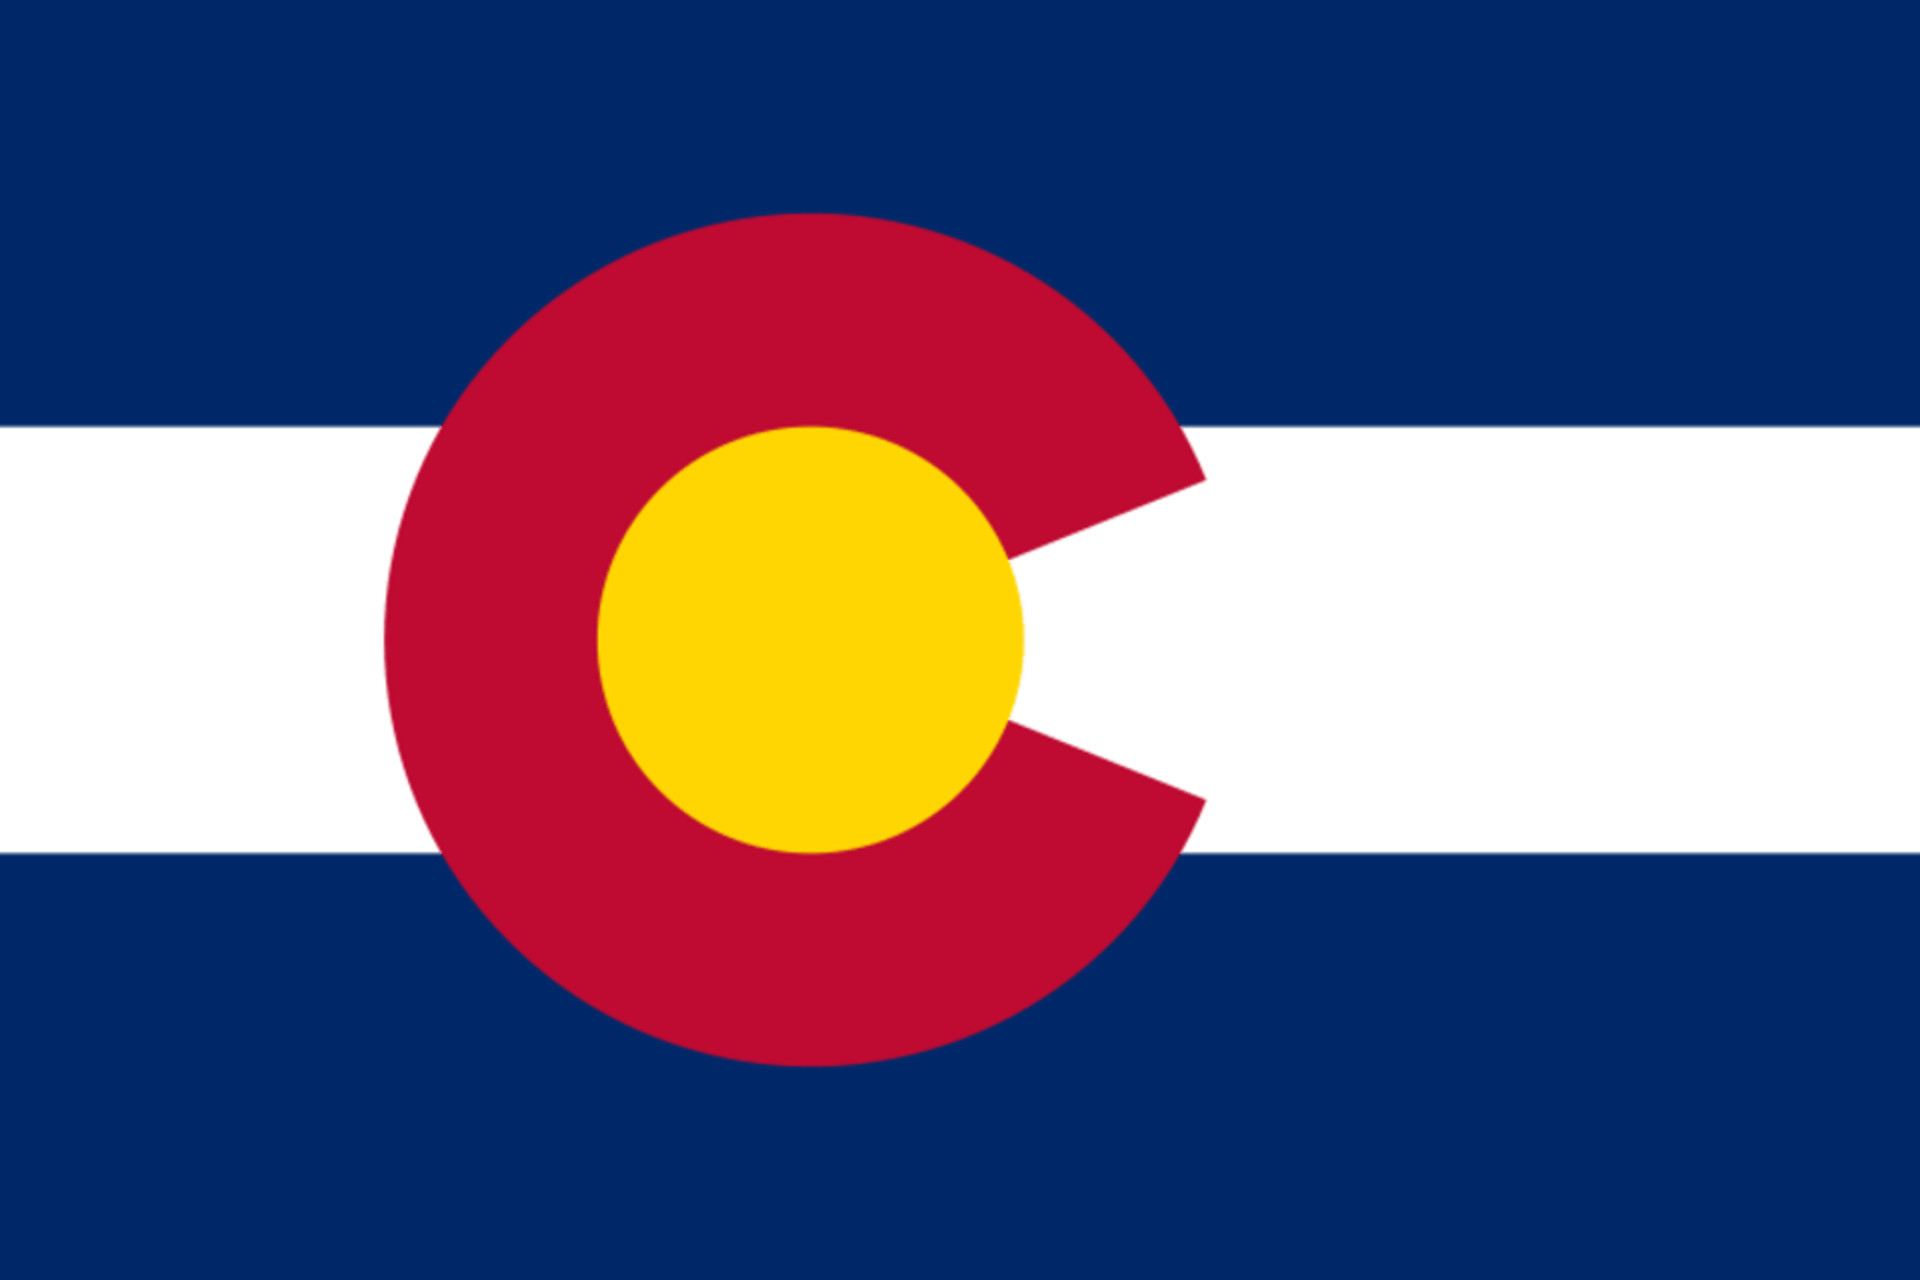 1920x1280 Colorado State Flag Wallpaper Colorado State Flag Wallpapers | All ..